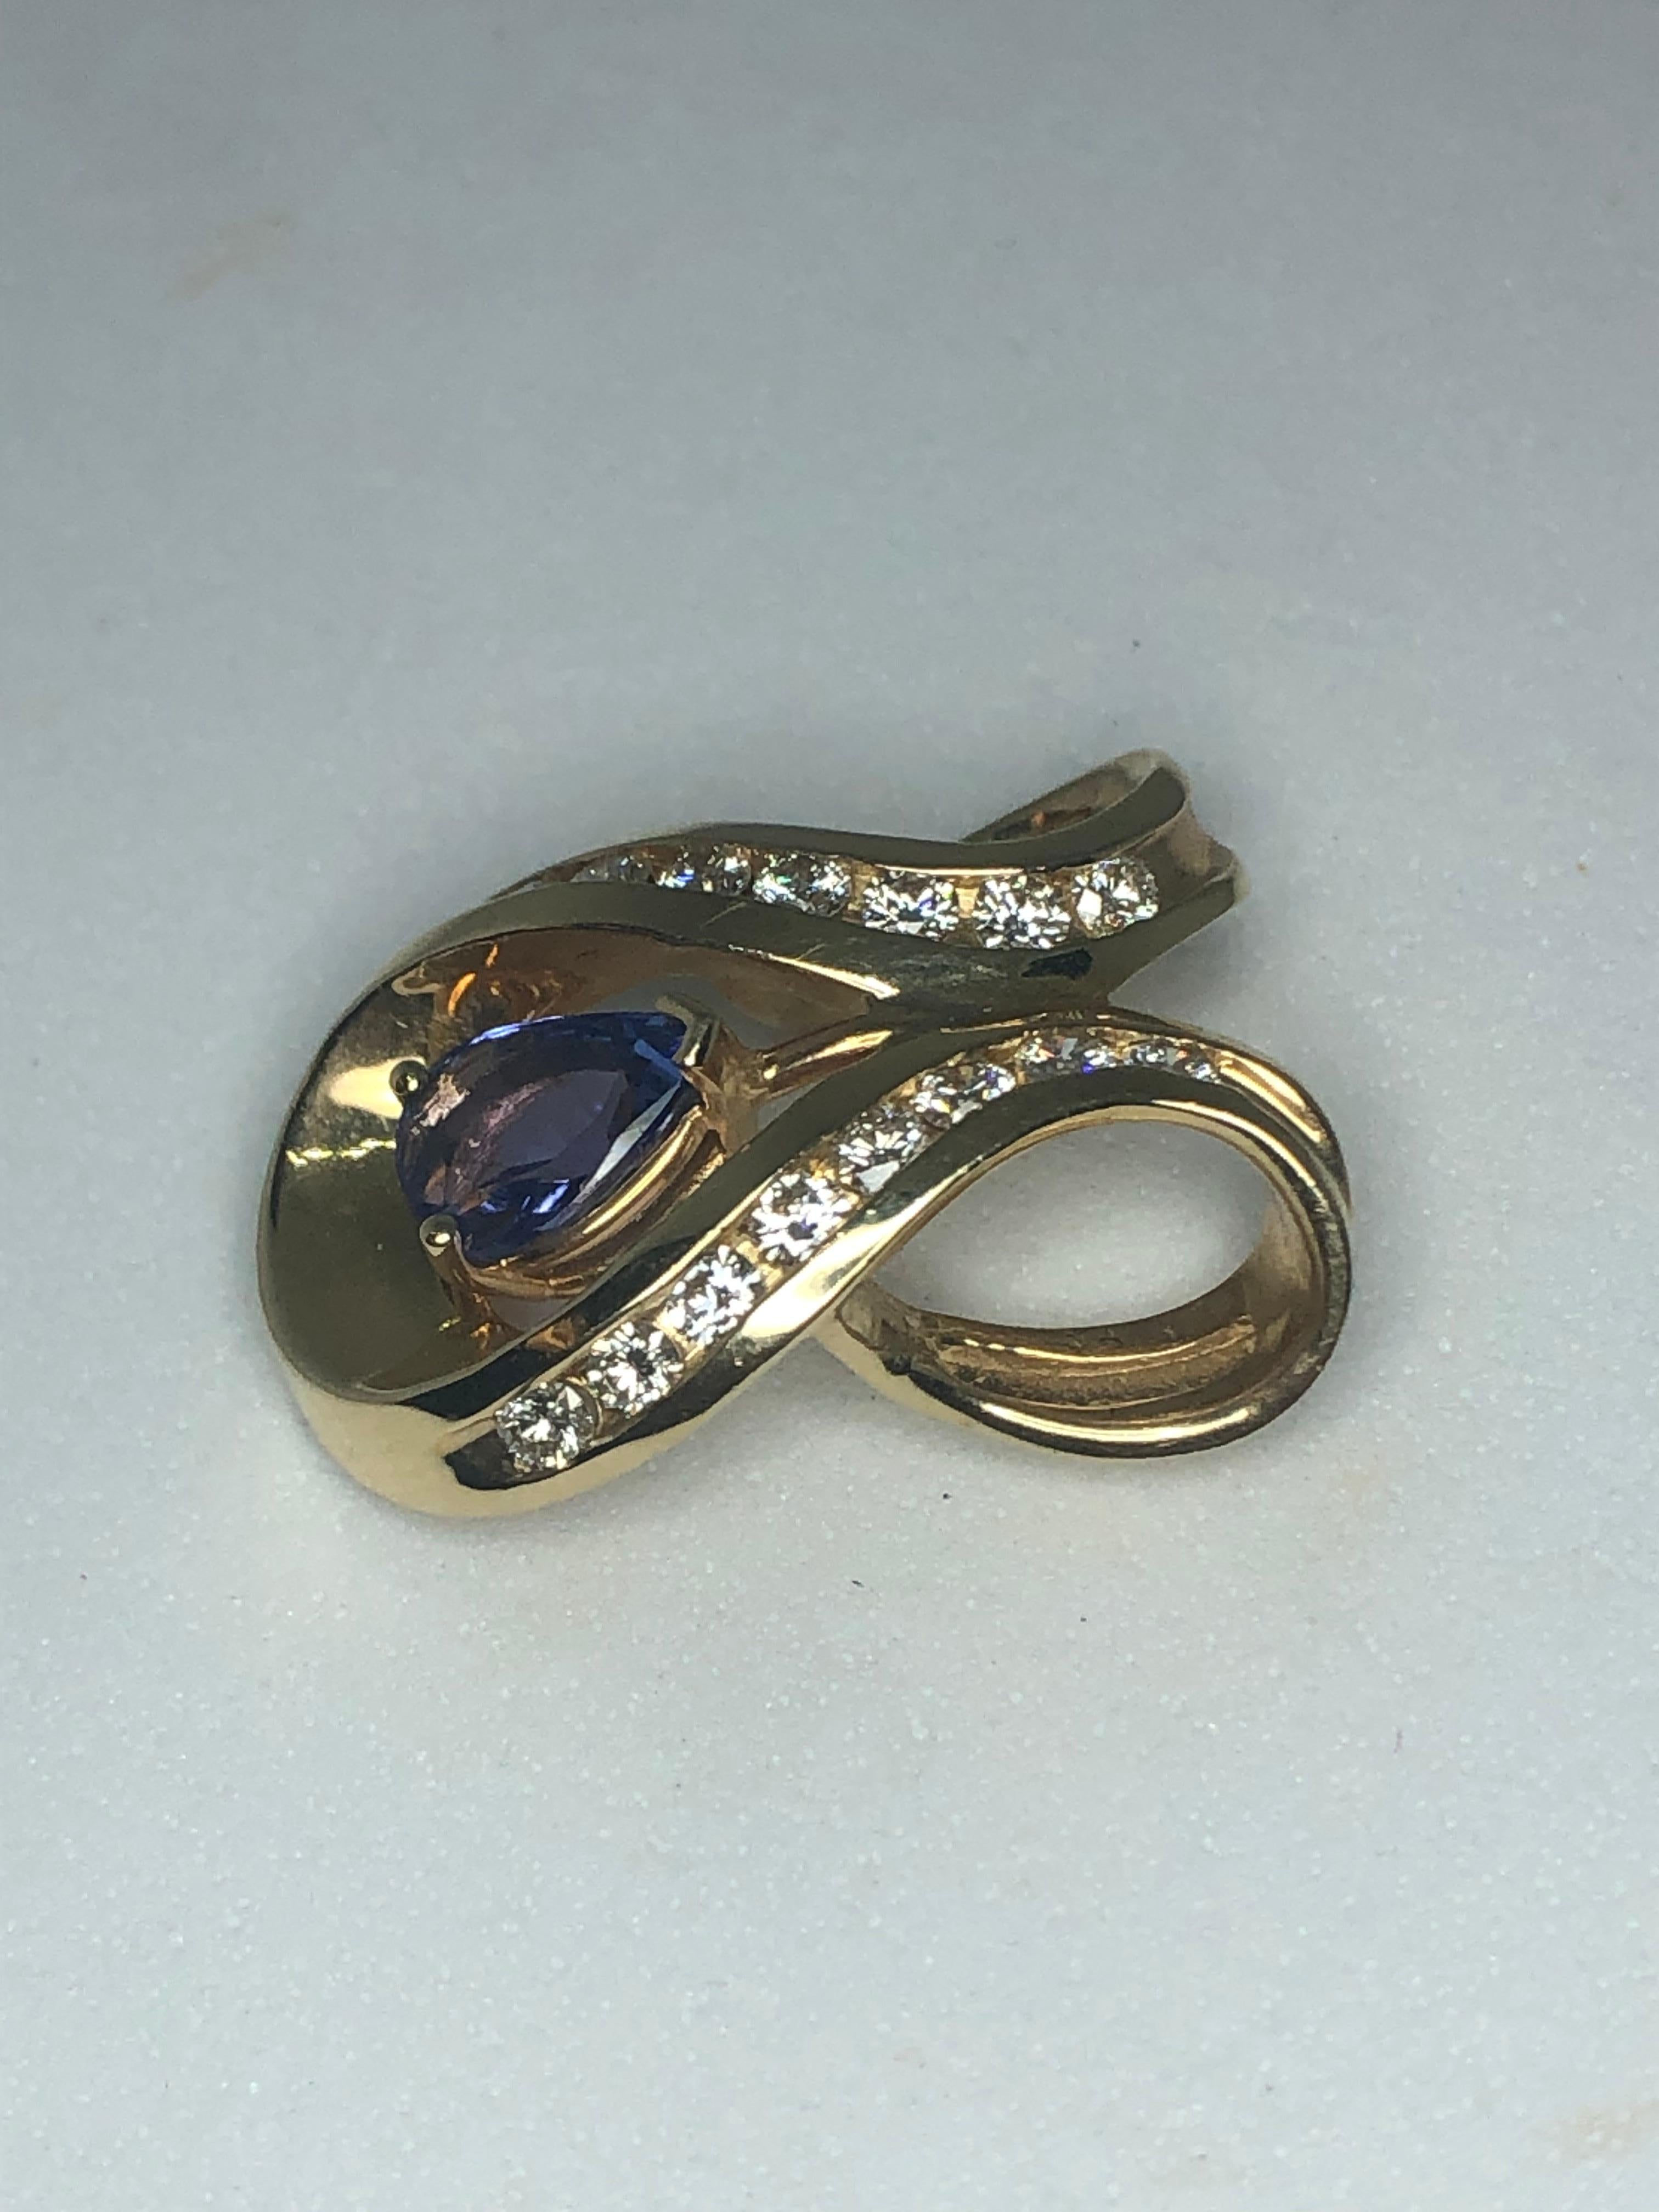 Lady's 14kt yellow gold tanzanite and diamond slide pendant by Cordova. Style #2222, 1 - pear shaped tanzanite = .75ct total weight, 16 full cut round diamonds = .48ct, average color G-H, average clarity VS2-SI1, 2.7dwt.